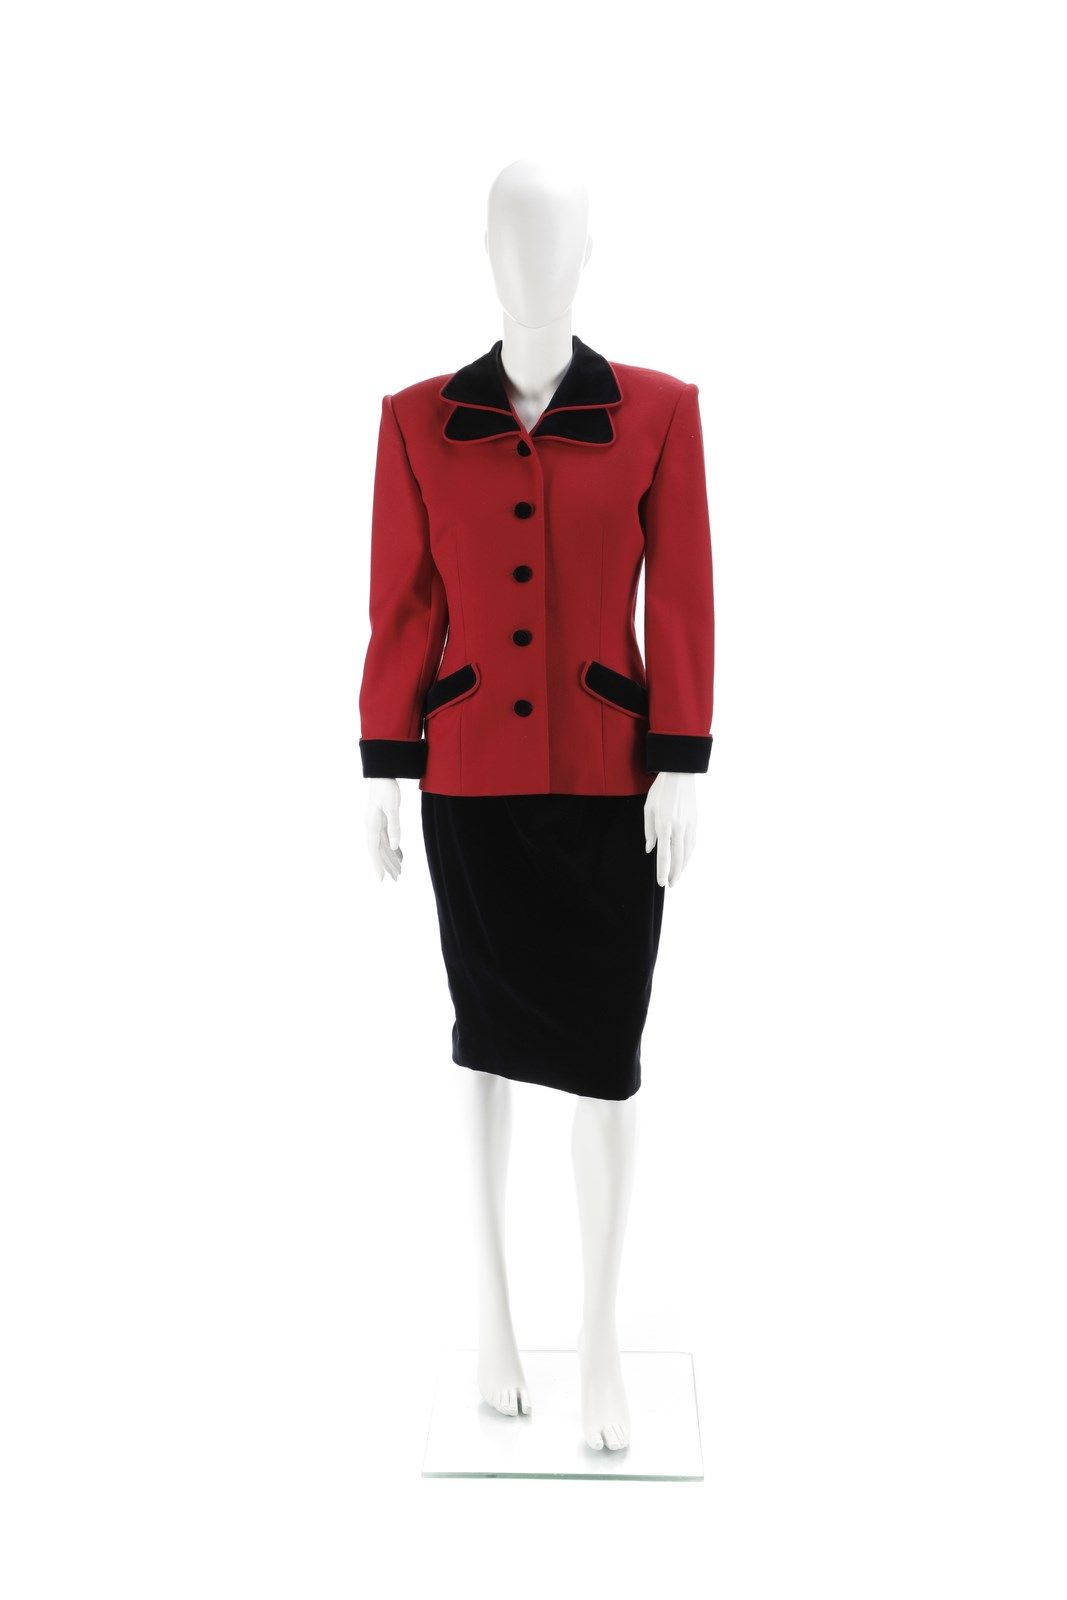 NORMA KAMALI Red suit jacket with double collar, pockets and cuffs in contrastin&hellip;